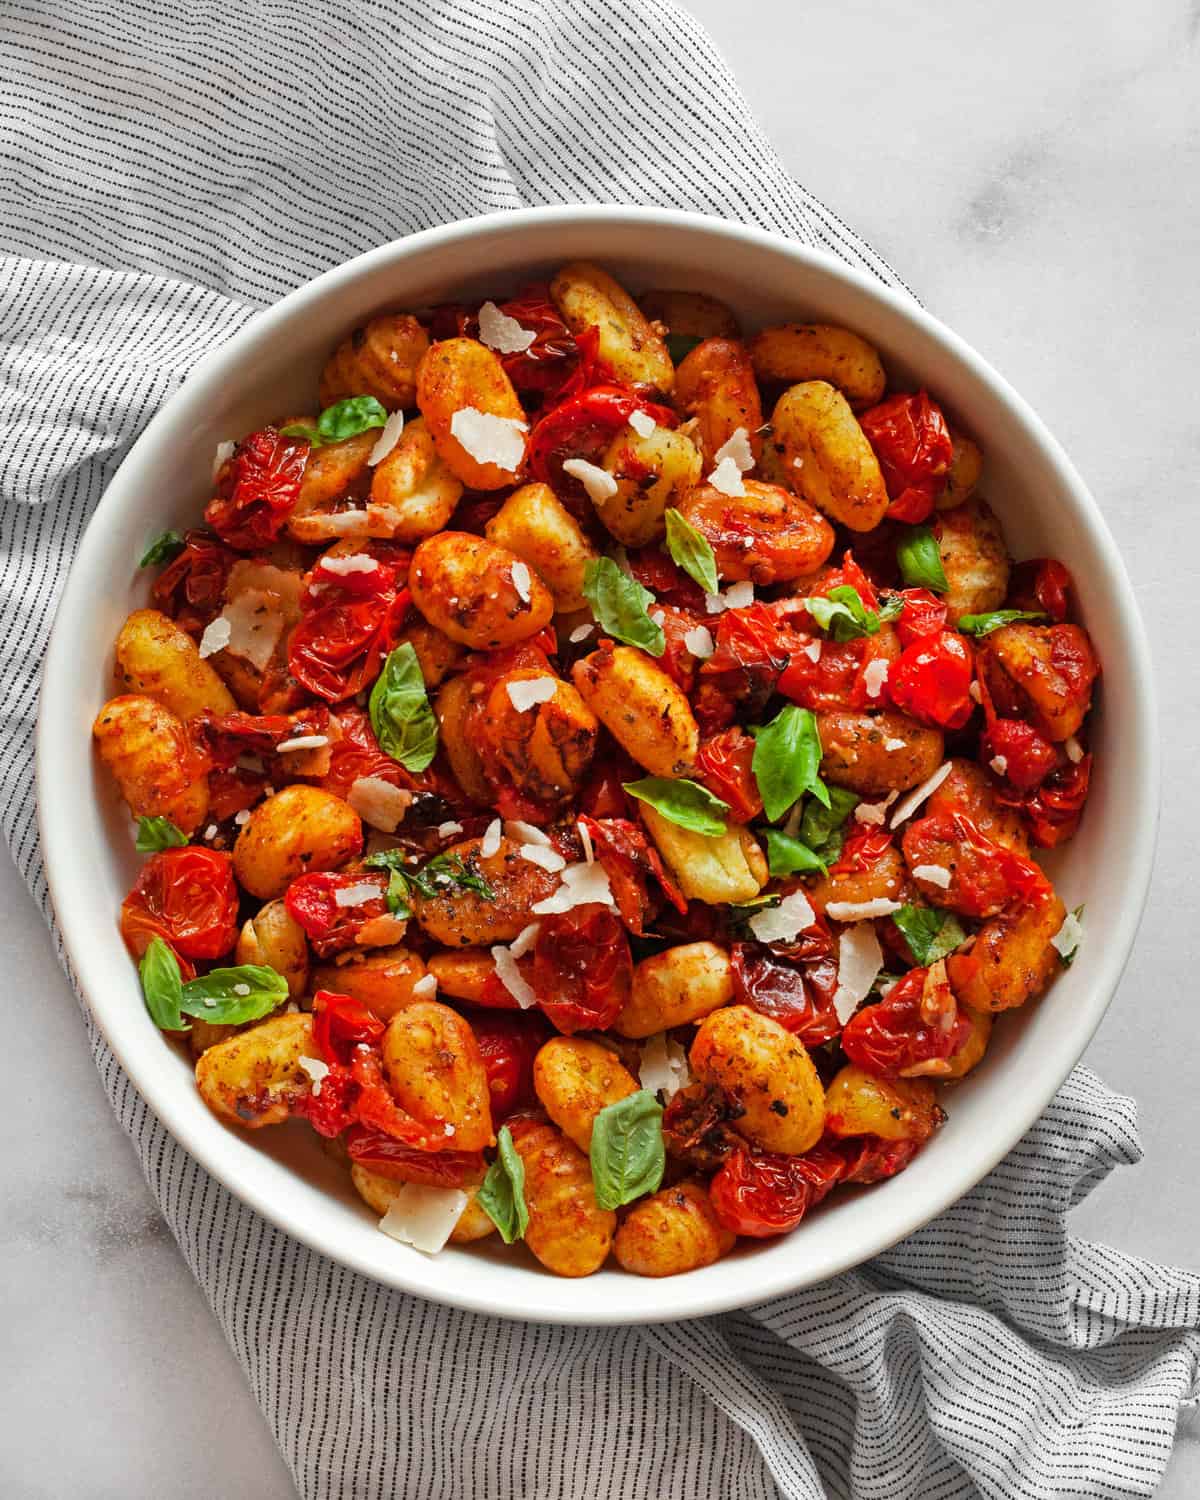 Sheet pan gnocchi with cherry tomatoes in a bowl.